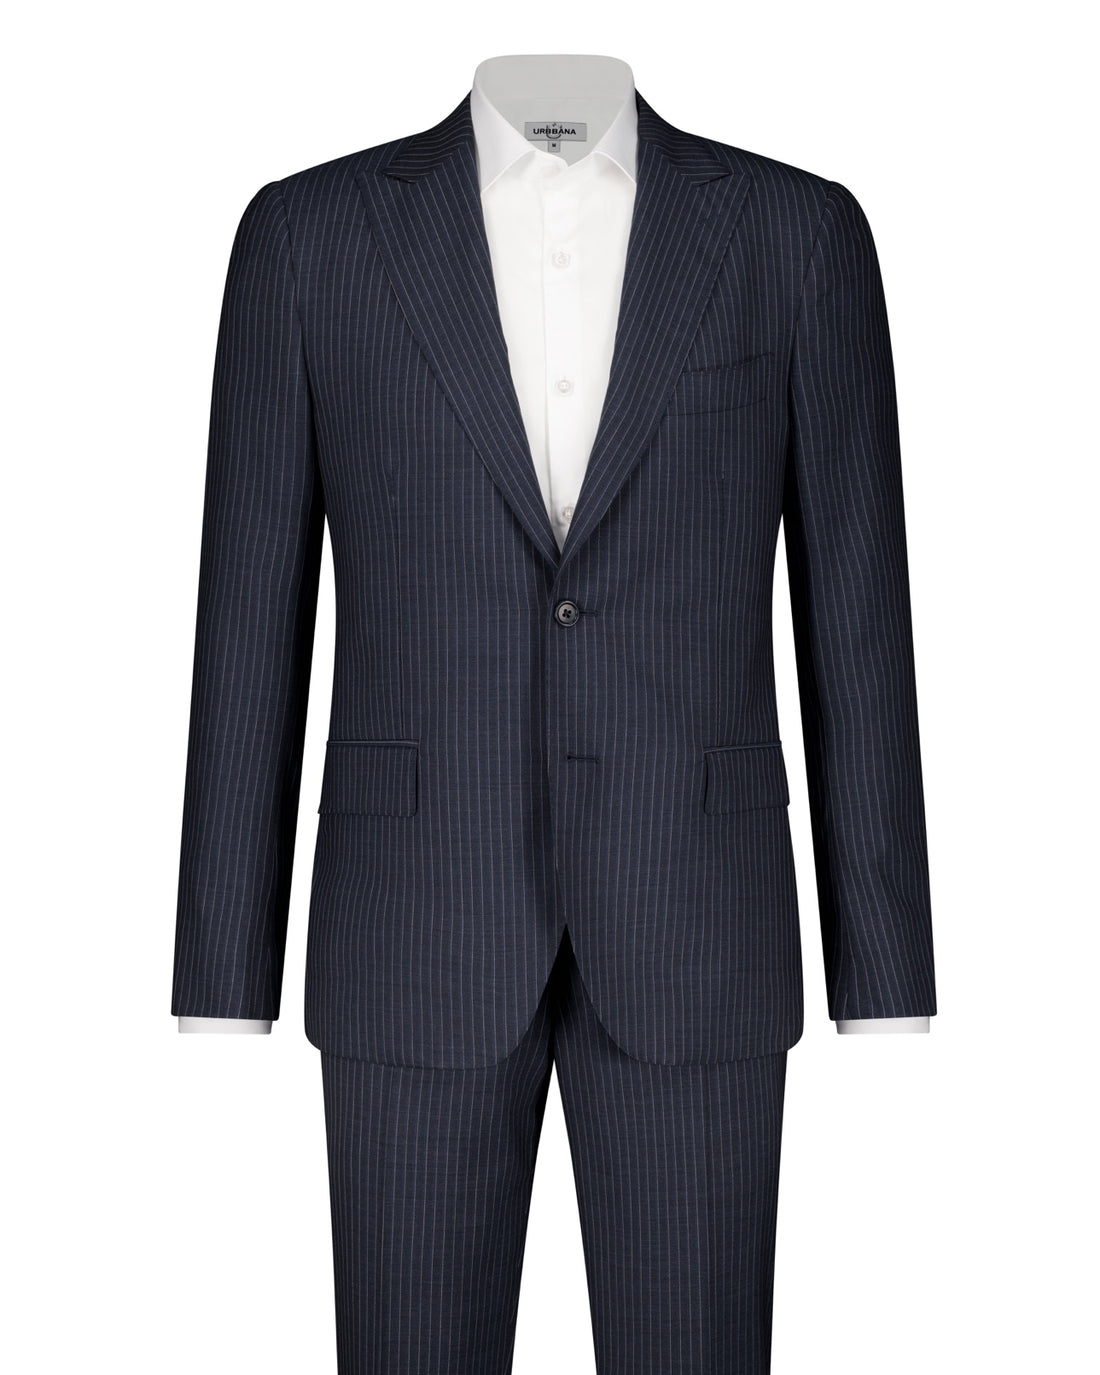 Bruno Zegna Cloth Suit - Navy - Made in Italy